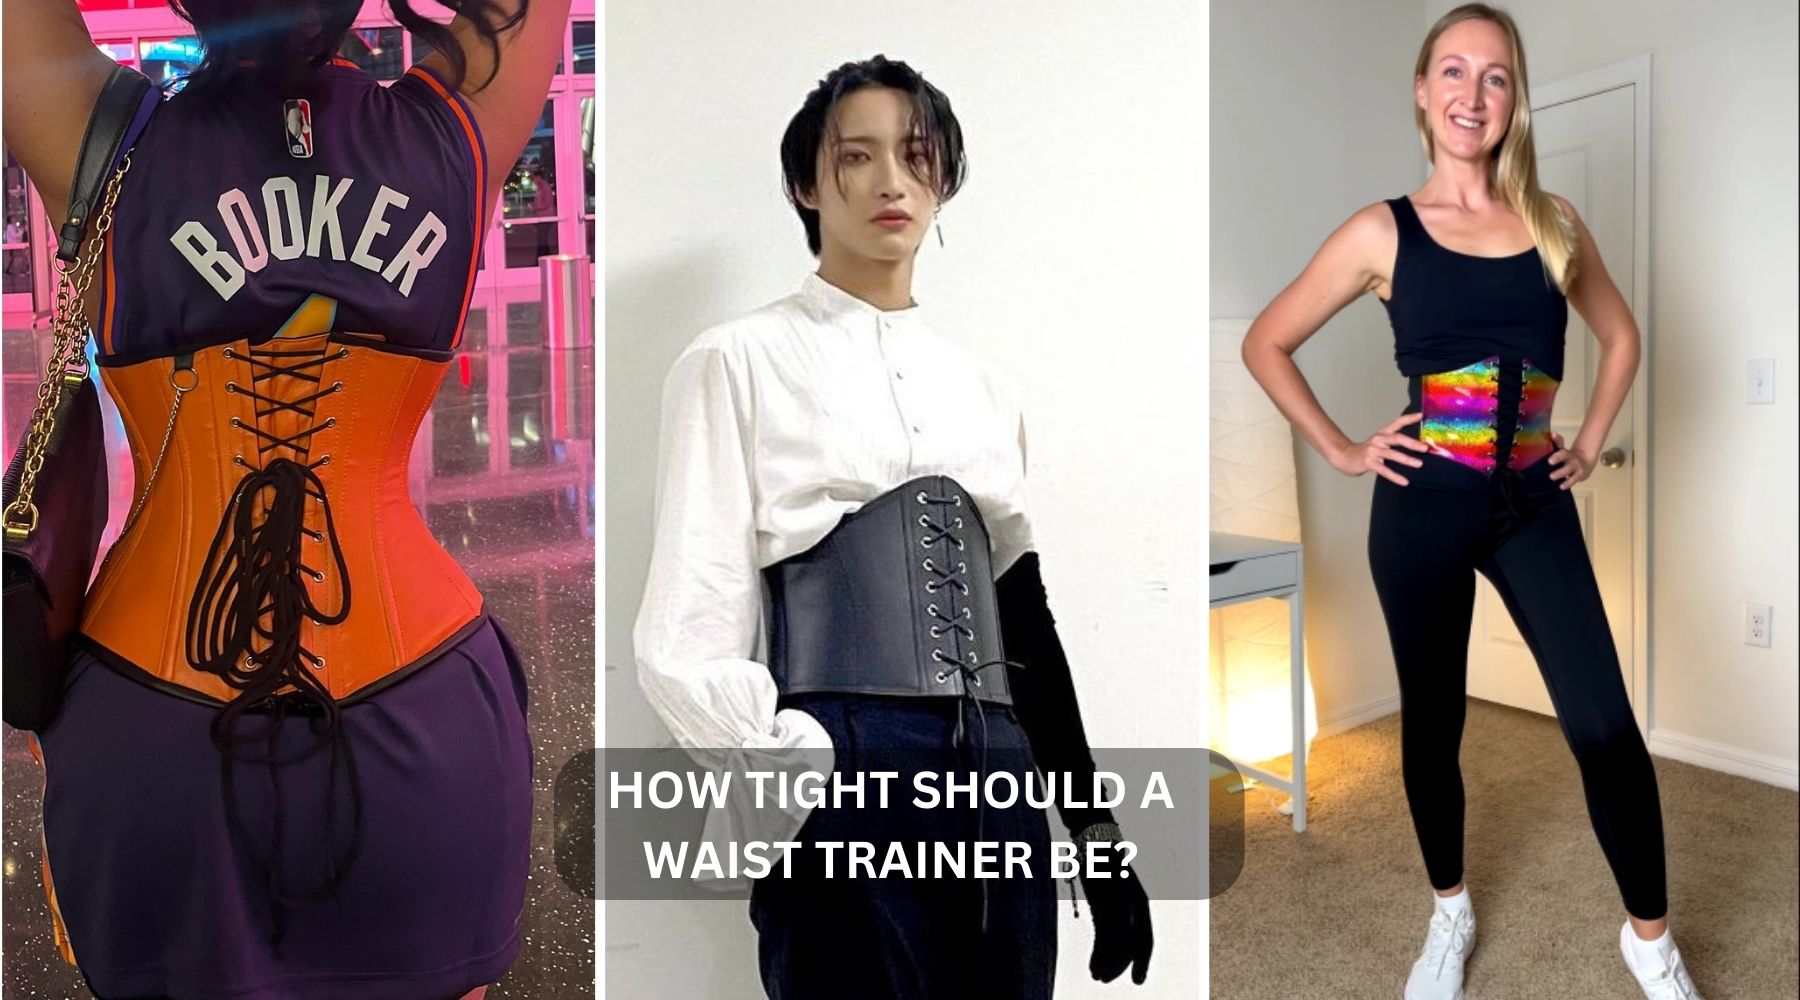 How Tight Should a Waist Trainer Be? Your Guide to Waist Training